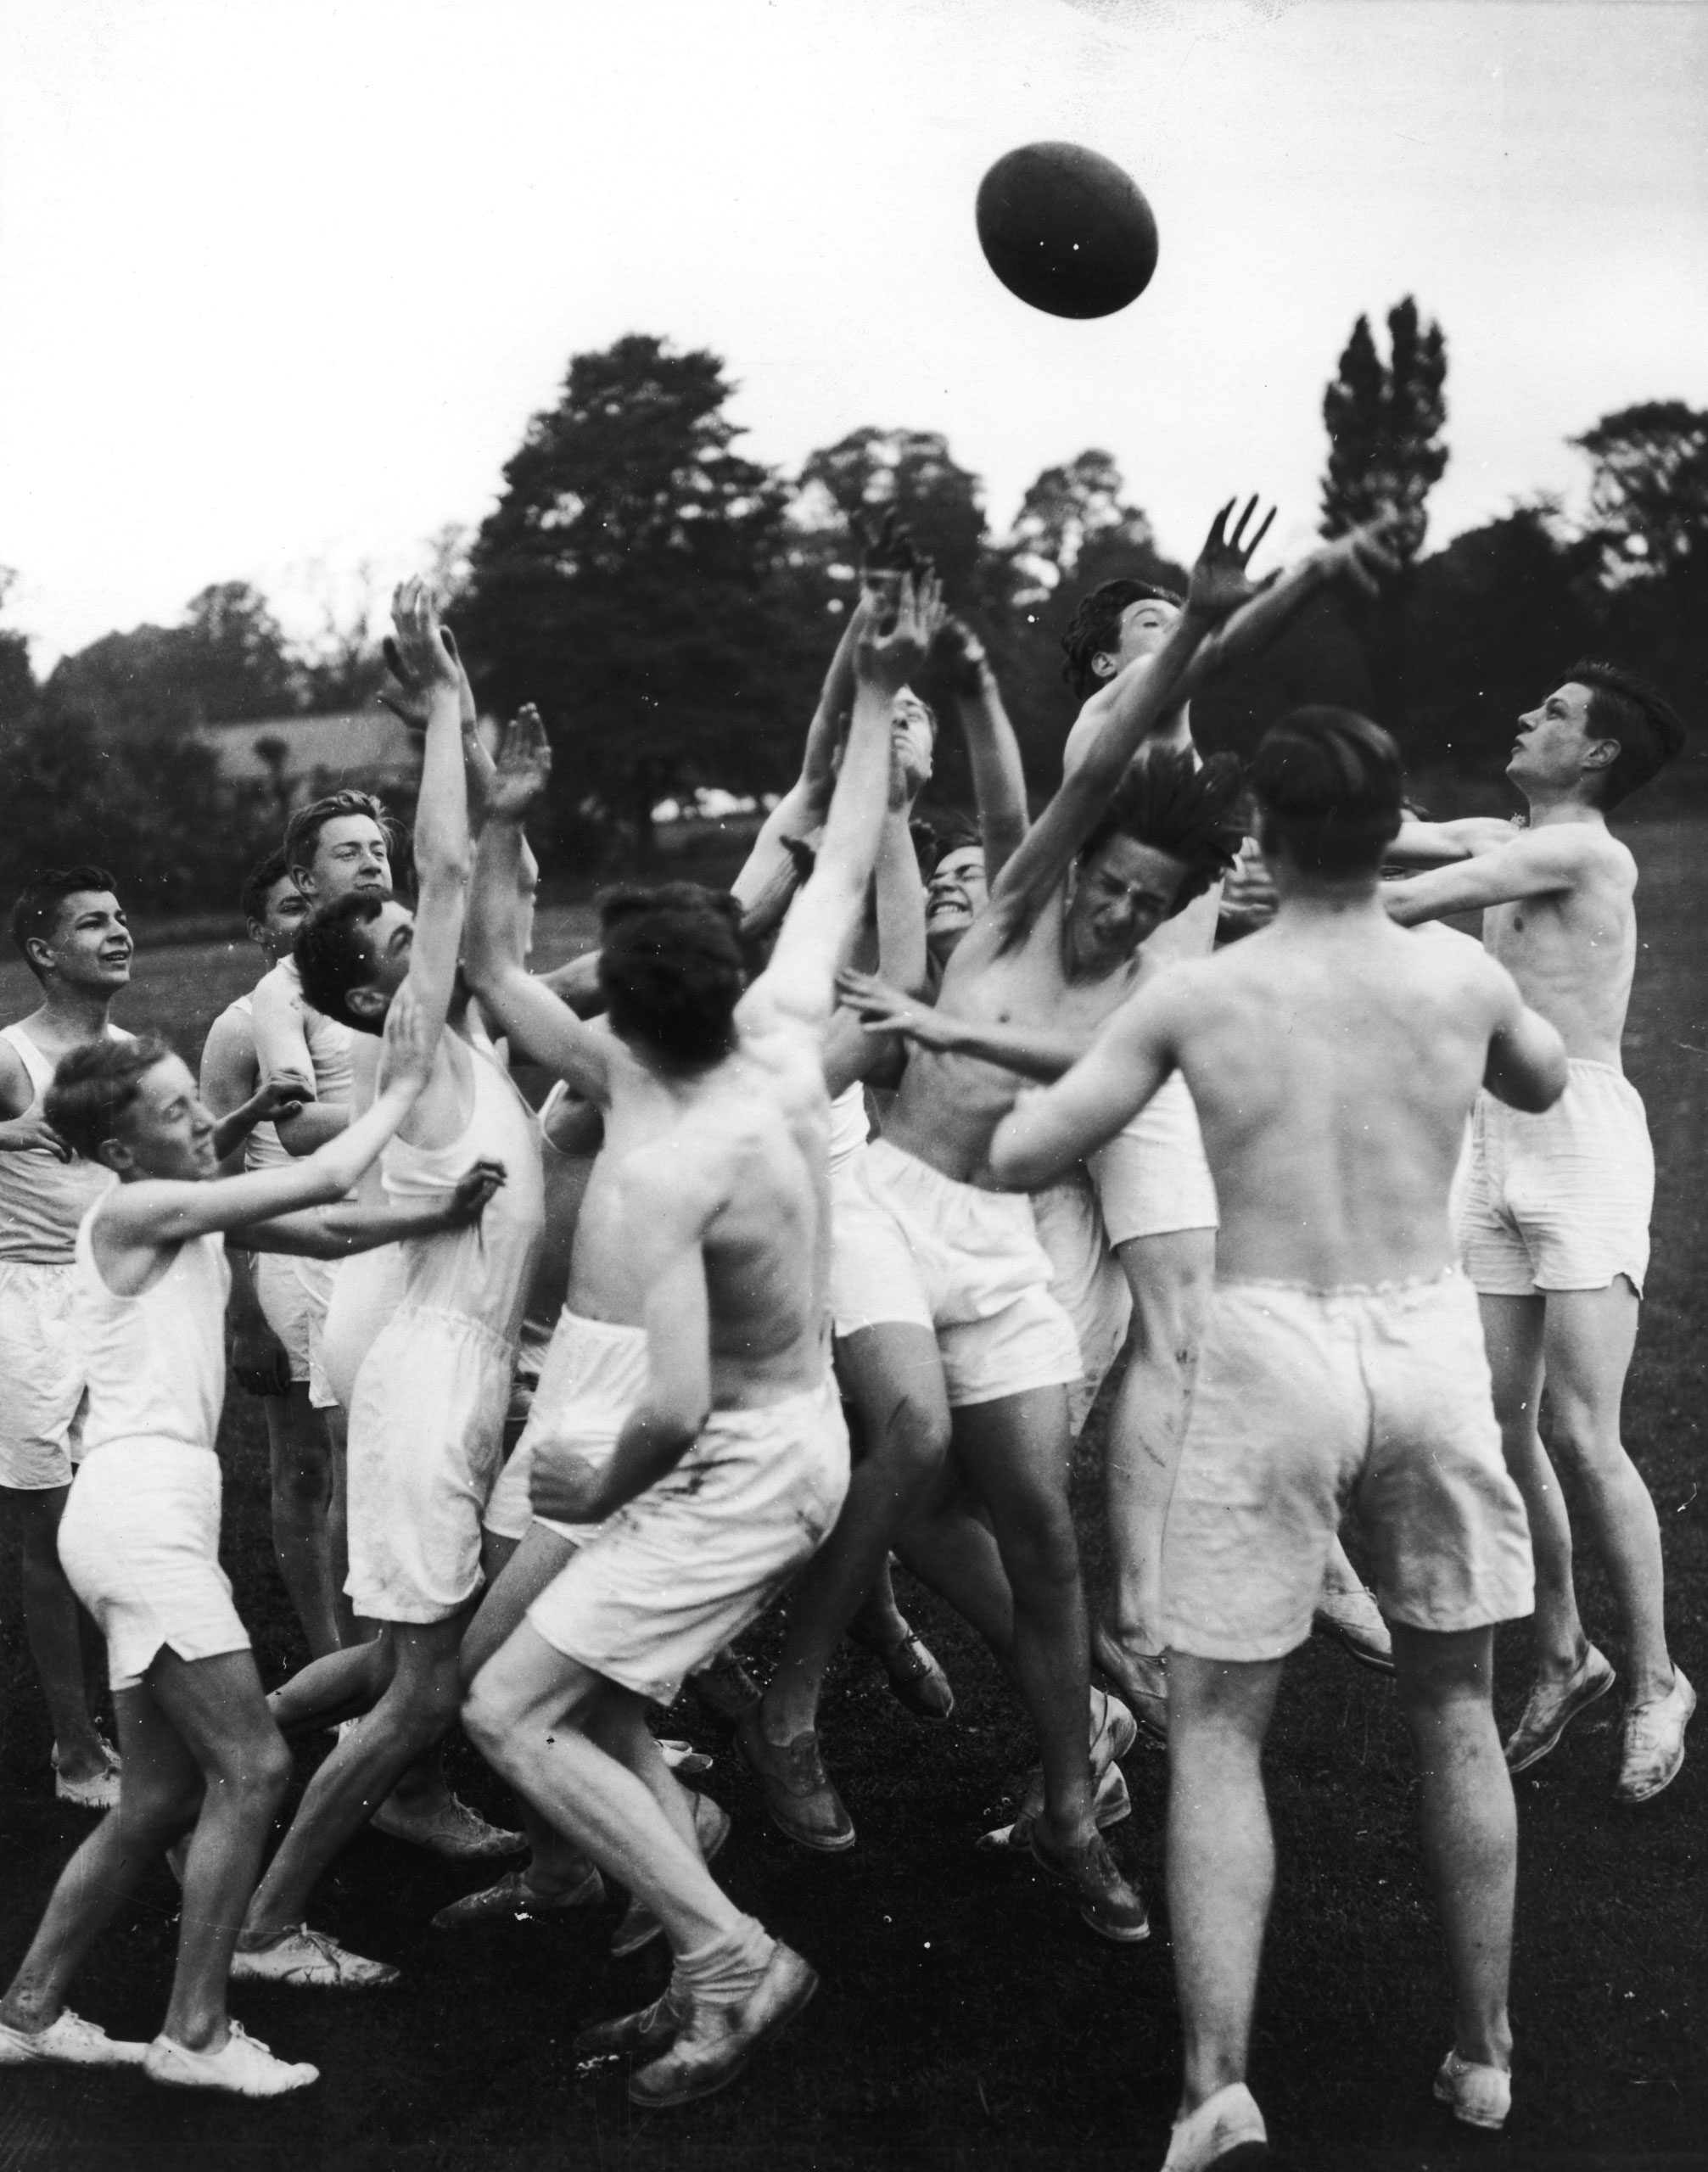 A summer game of touch rugby at Marling School, Stroud, Gloucestershire, August 1937.